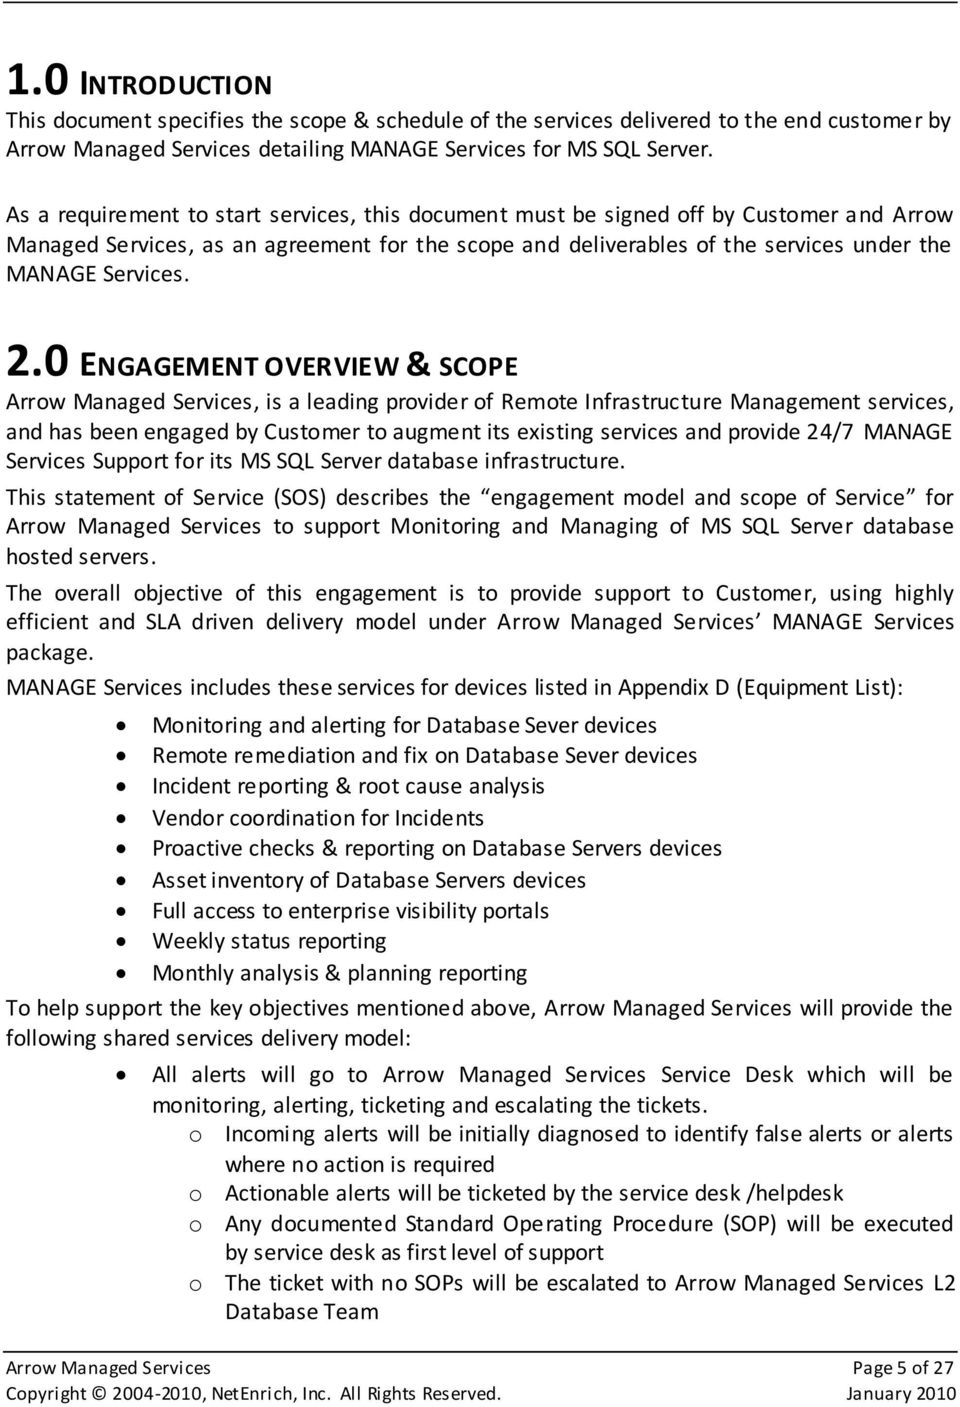 2.0 ENGAGEMENT OVERVIEW & SCOPE Arrow Managed Services, is a leading provider of Remote Infrastructure Management services, and has been engaged by Customer to augment its existing services and